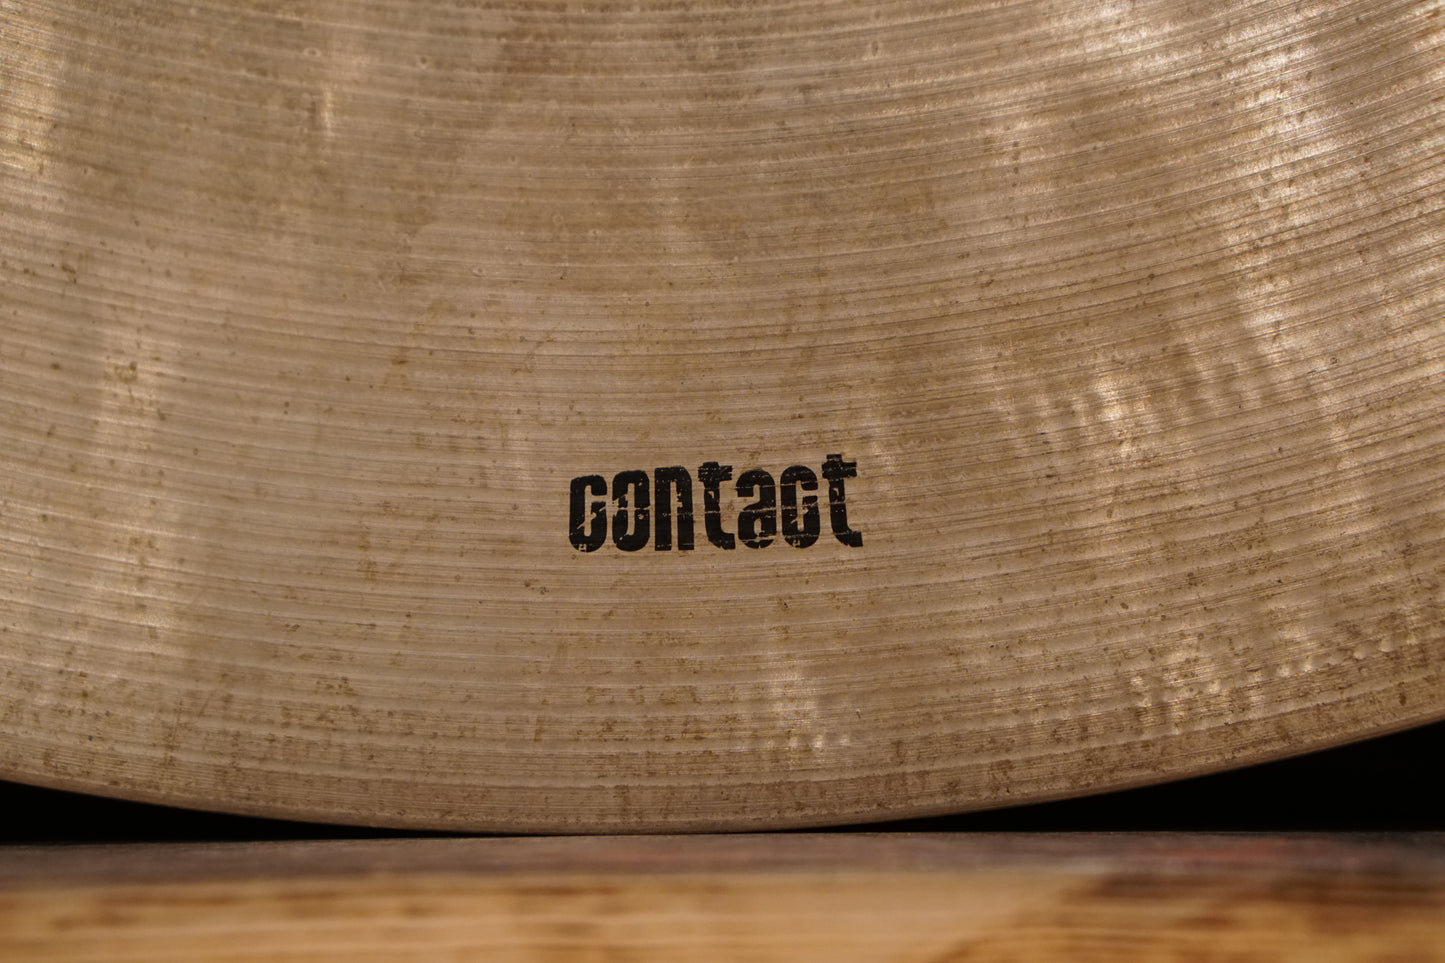 Dream 24" Contact Small Bell Flat Ride Cymbal - 3190g